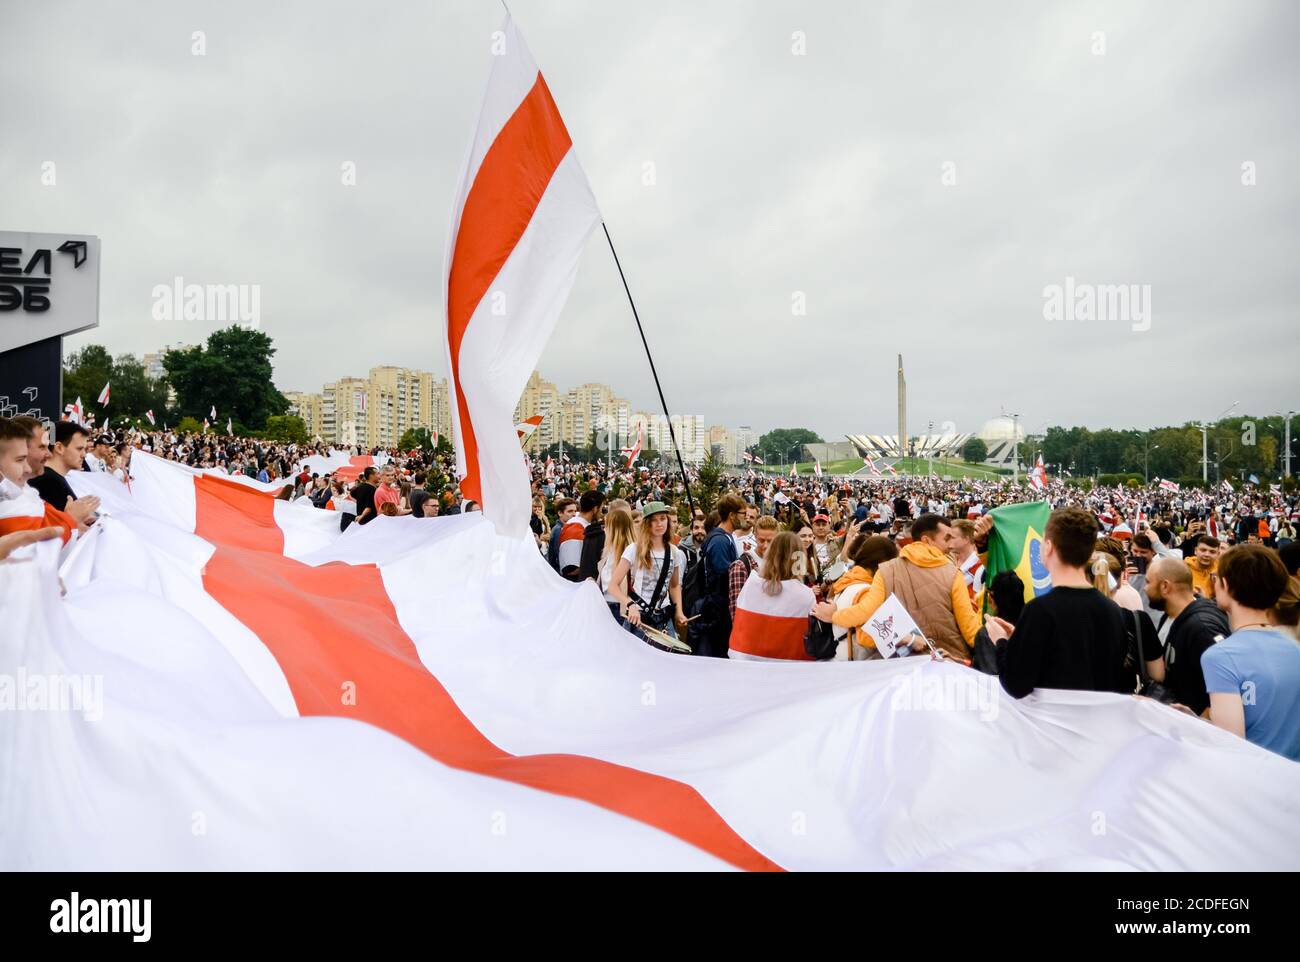 Minsk, Belarus - August 23, 2020: Belarusian people participate in peaceful protest after presidential elections in Belarus Stock Photo